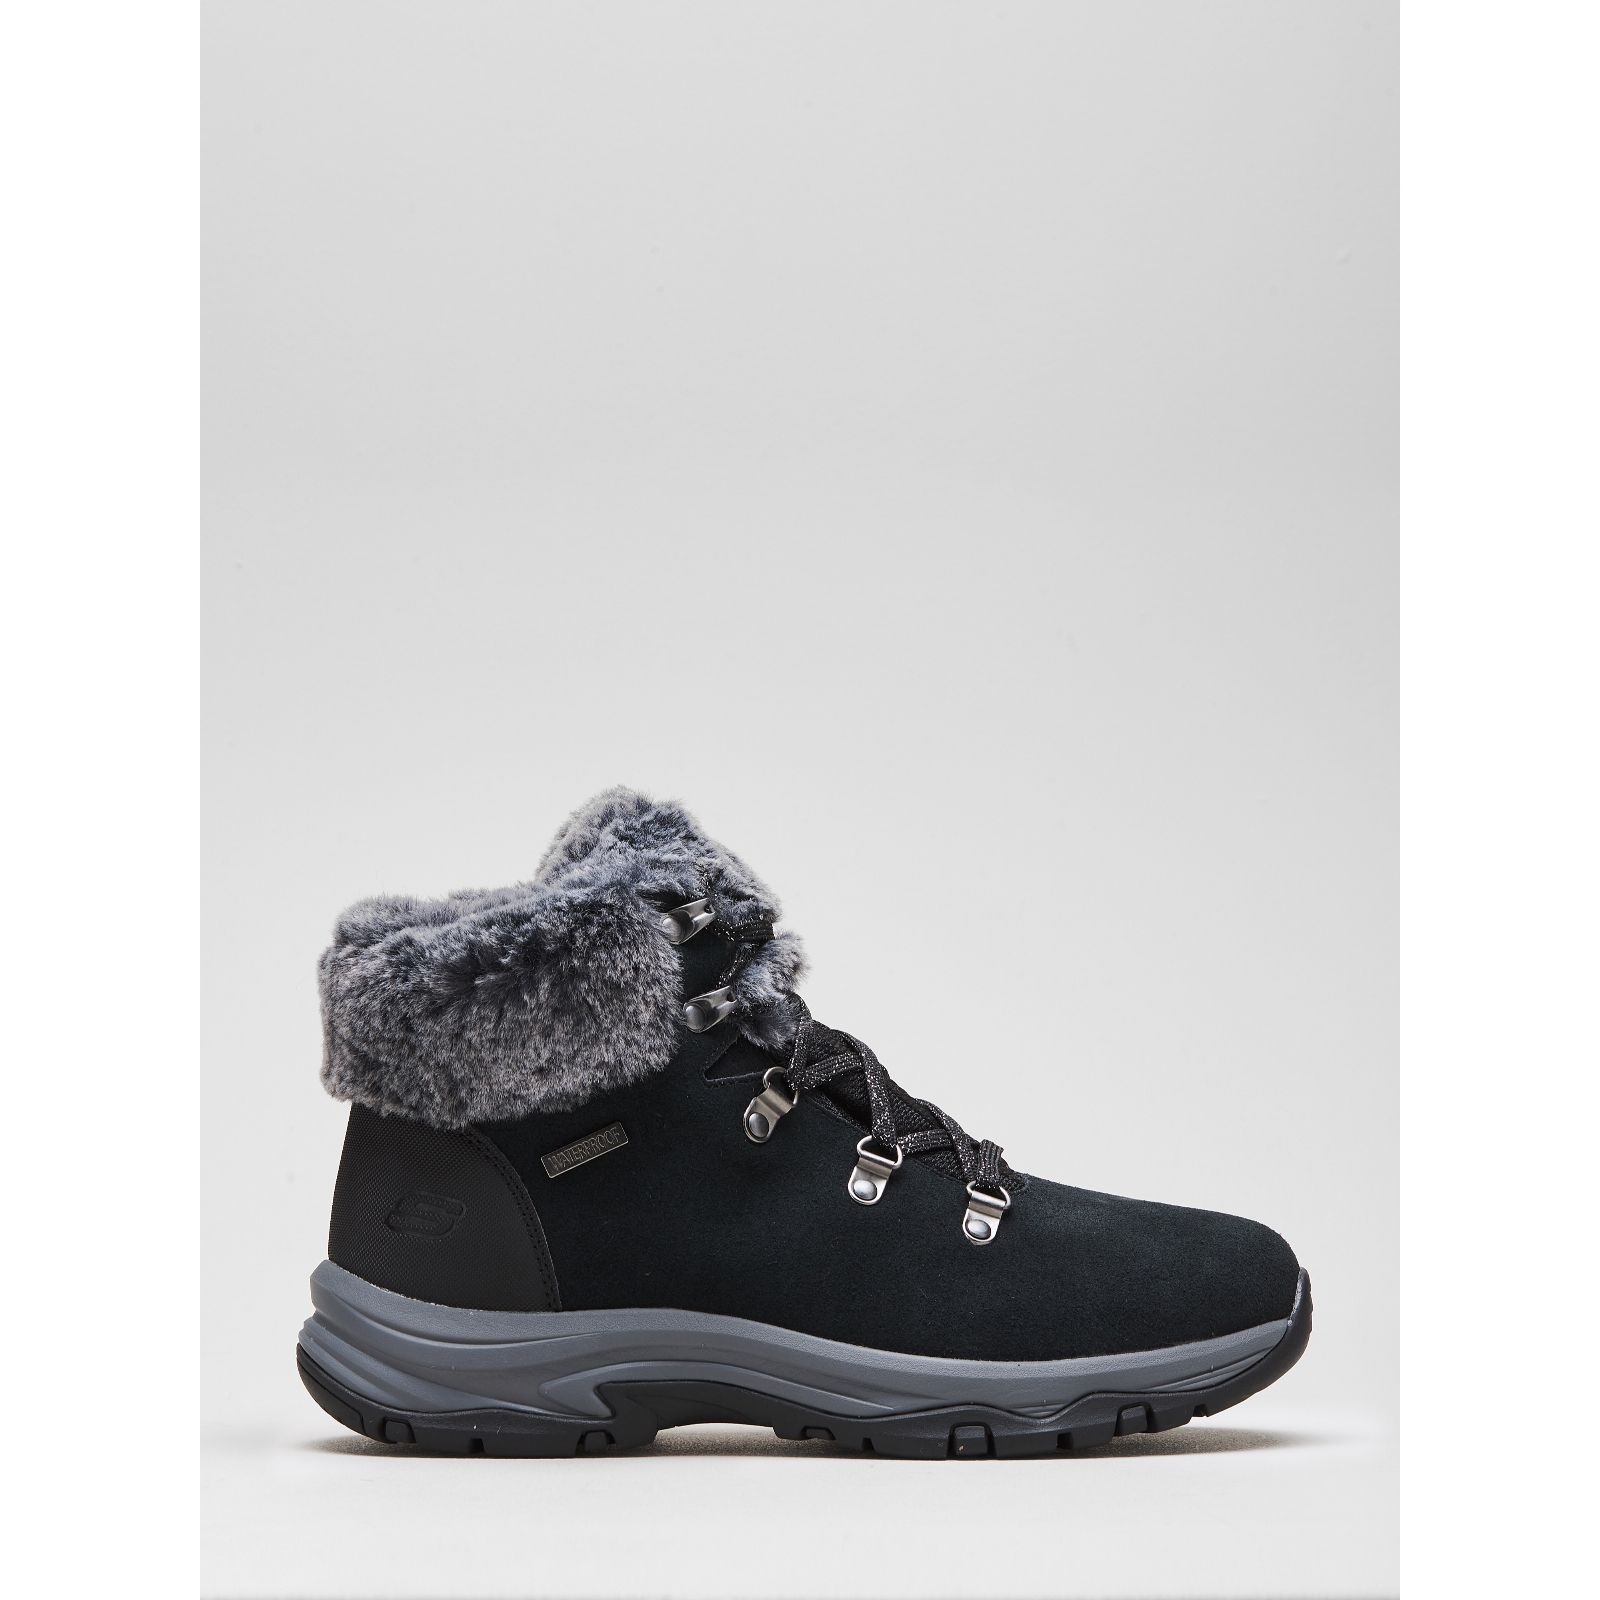 skechers boots with fur